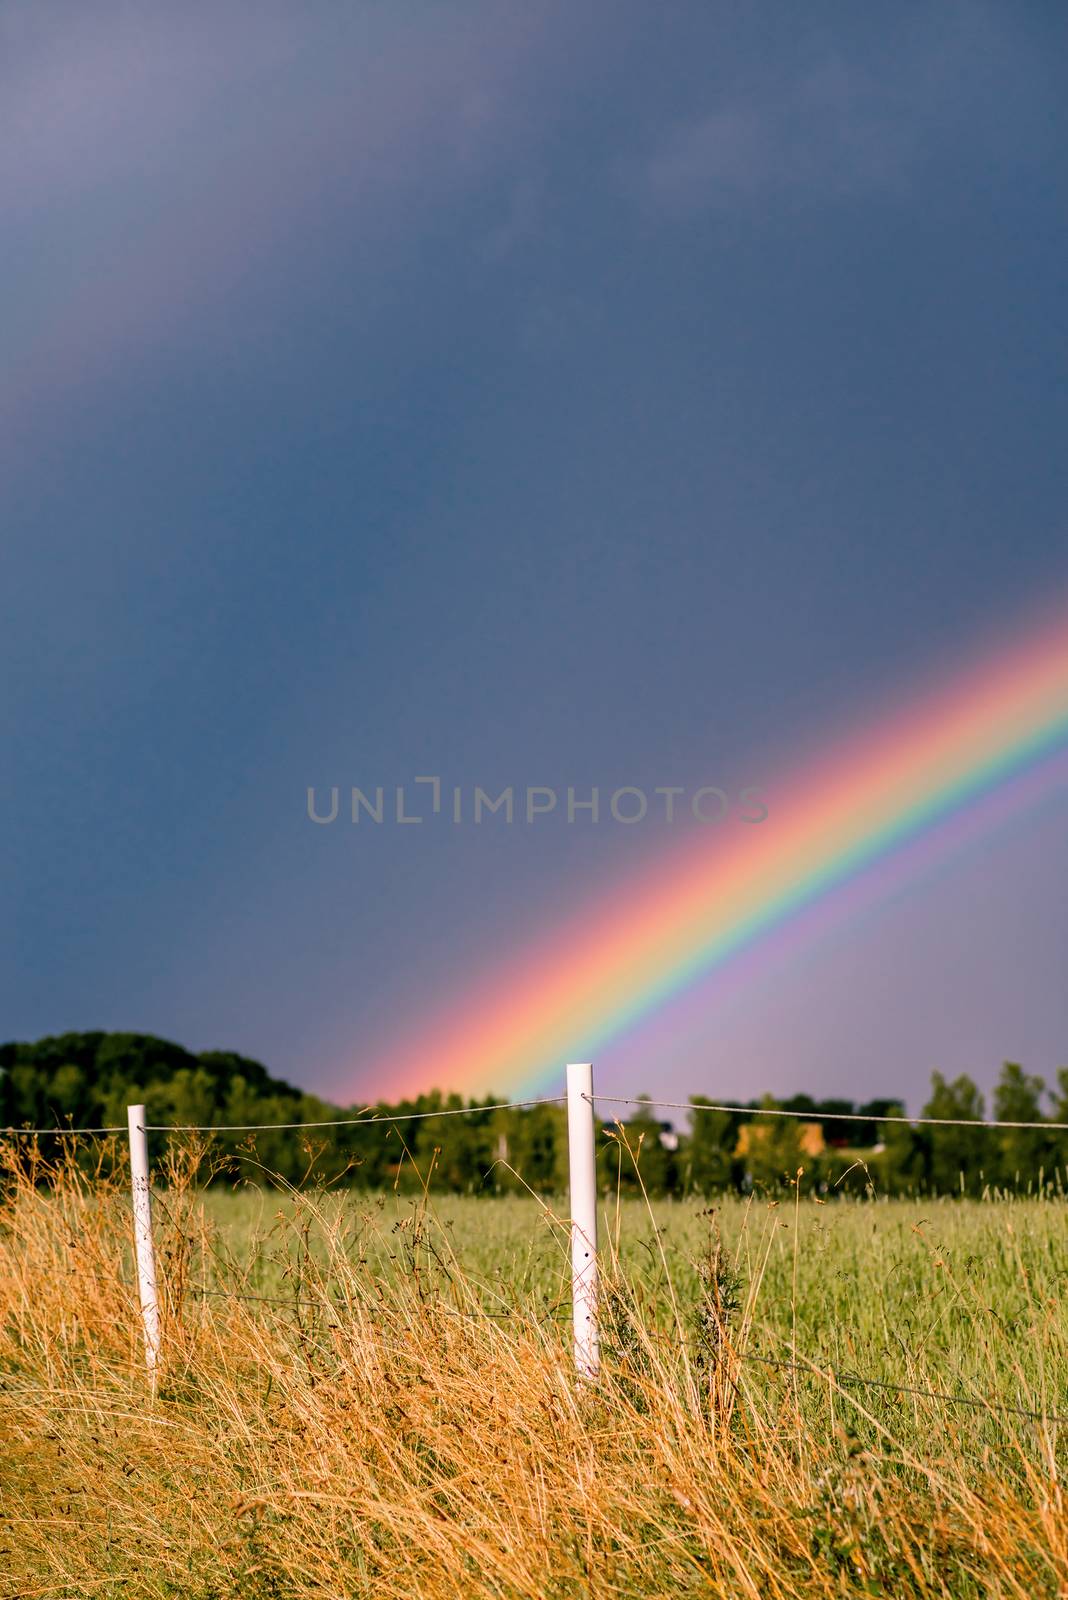 Rainbow coming over a field with a white fence